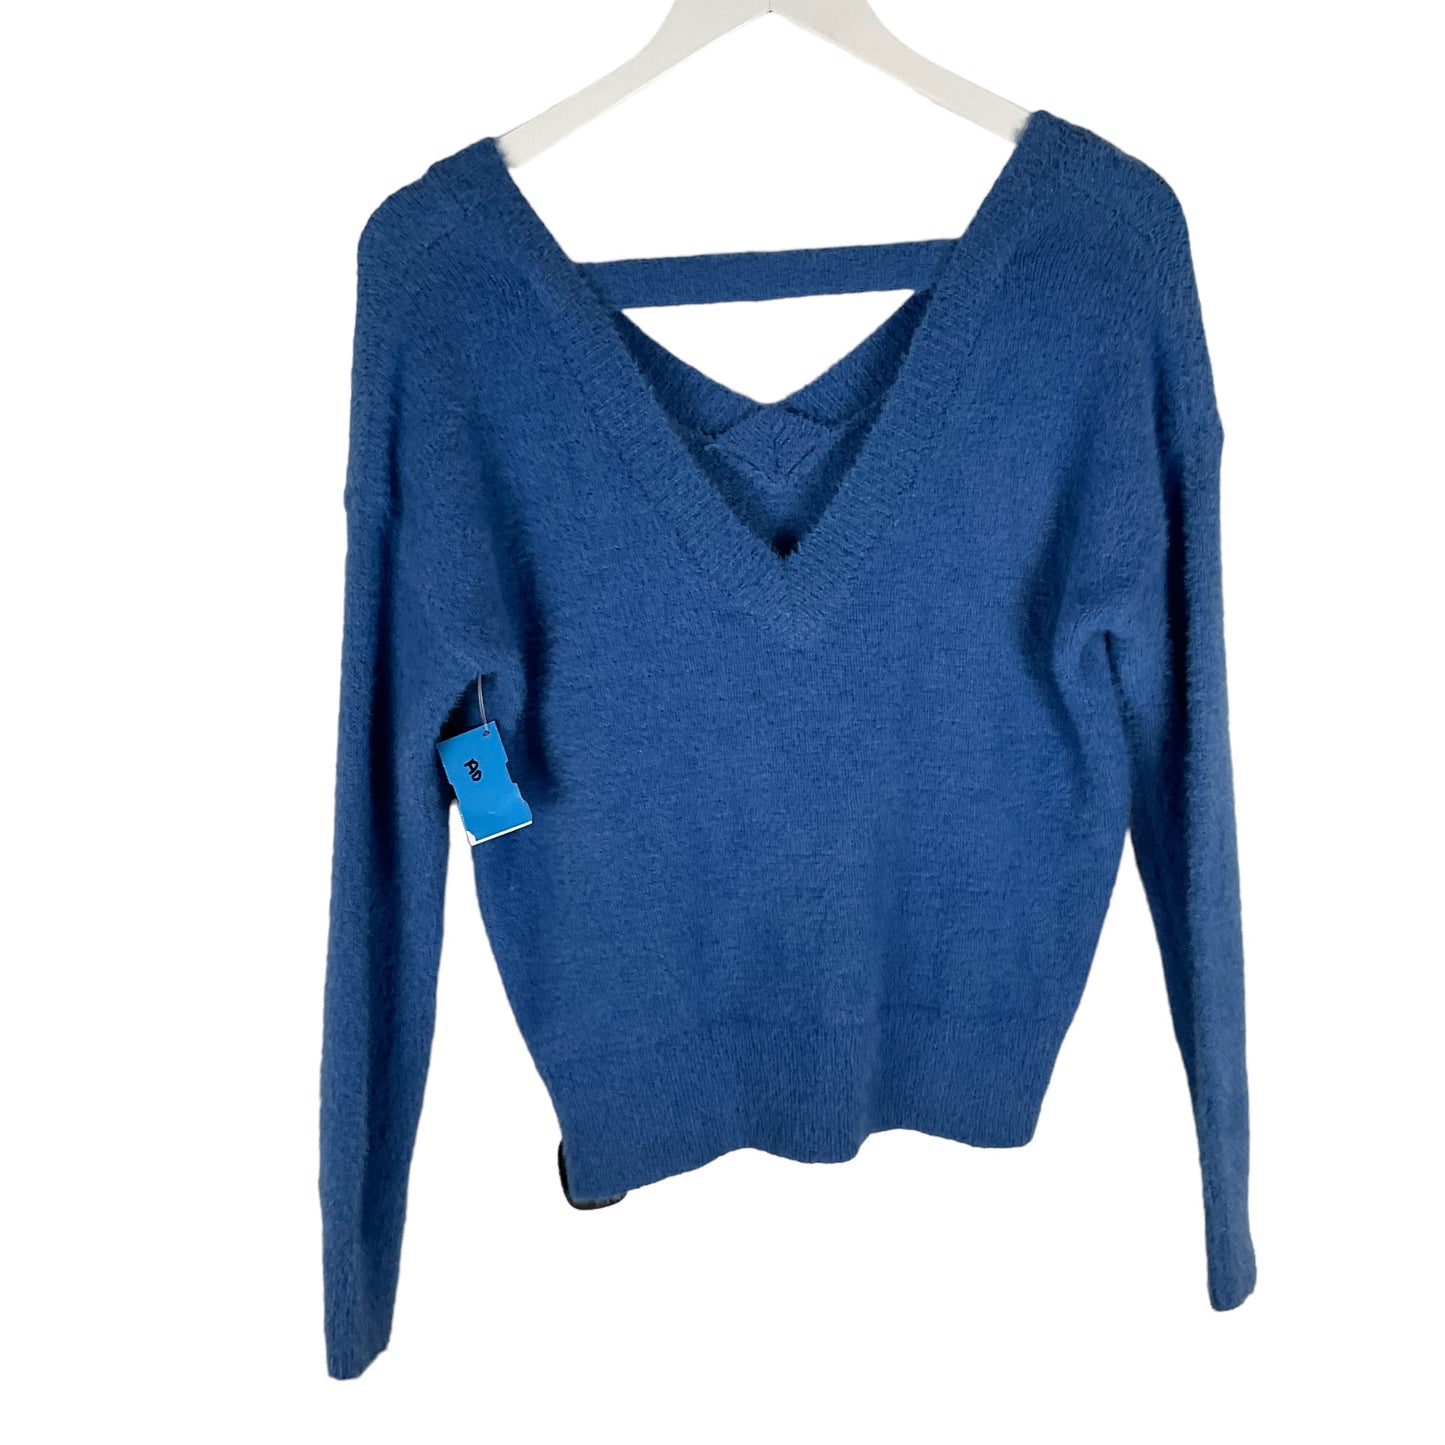 Sweater By Jessica Simpson  Size: Xs